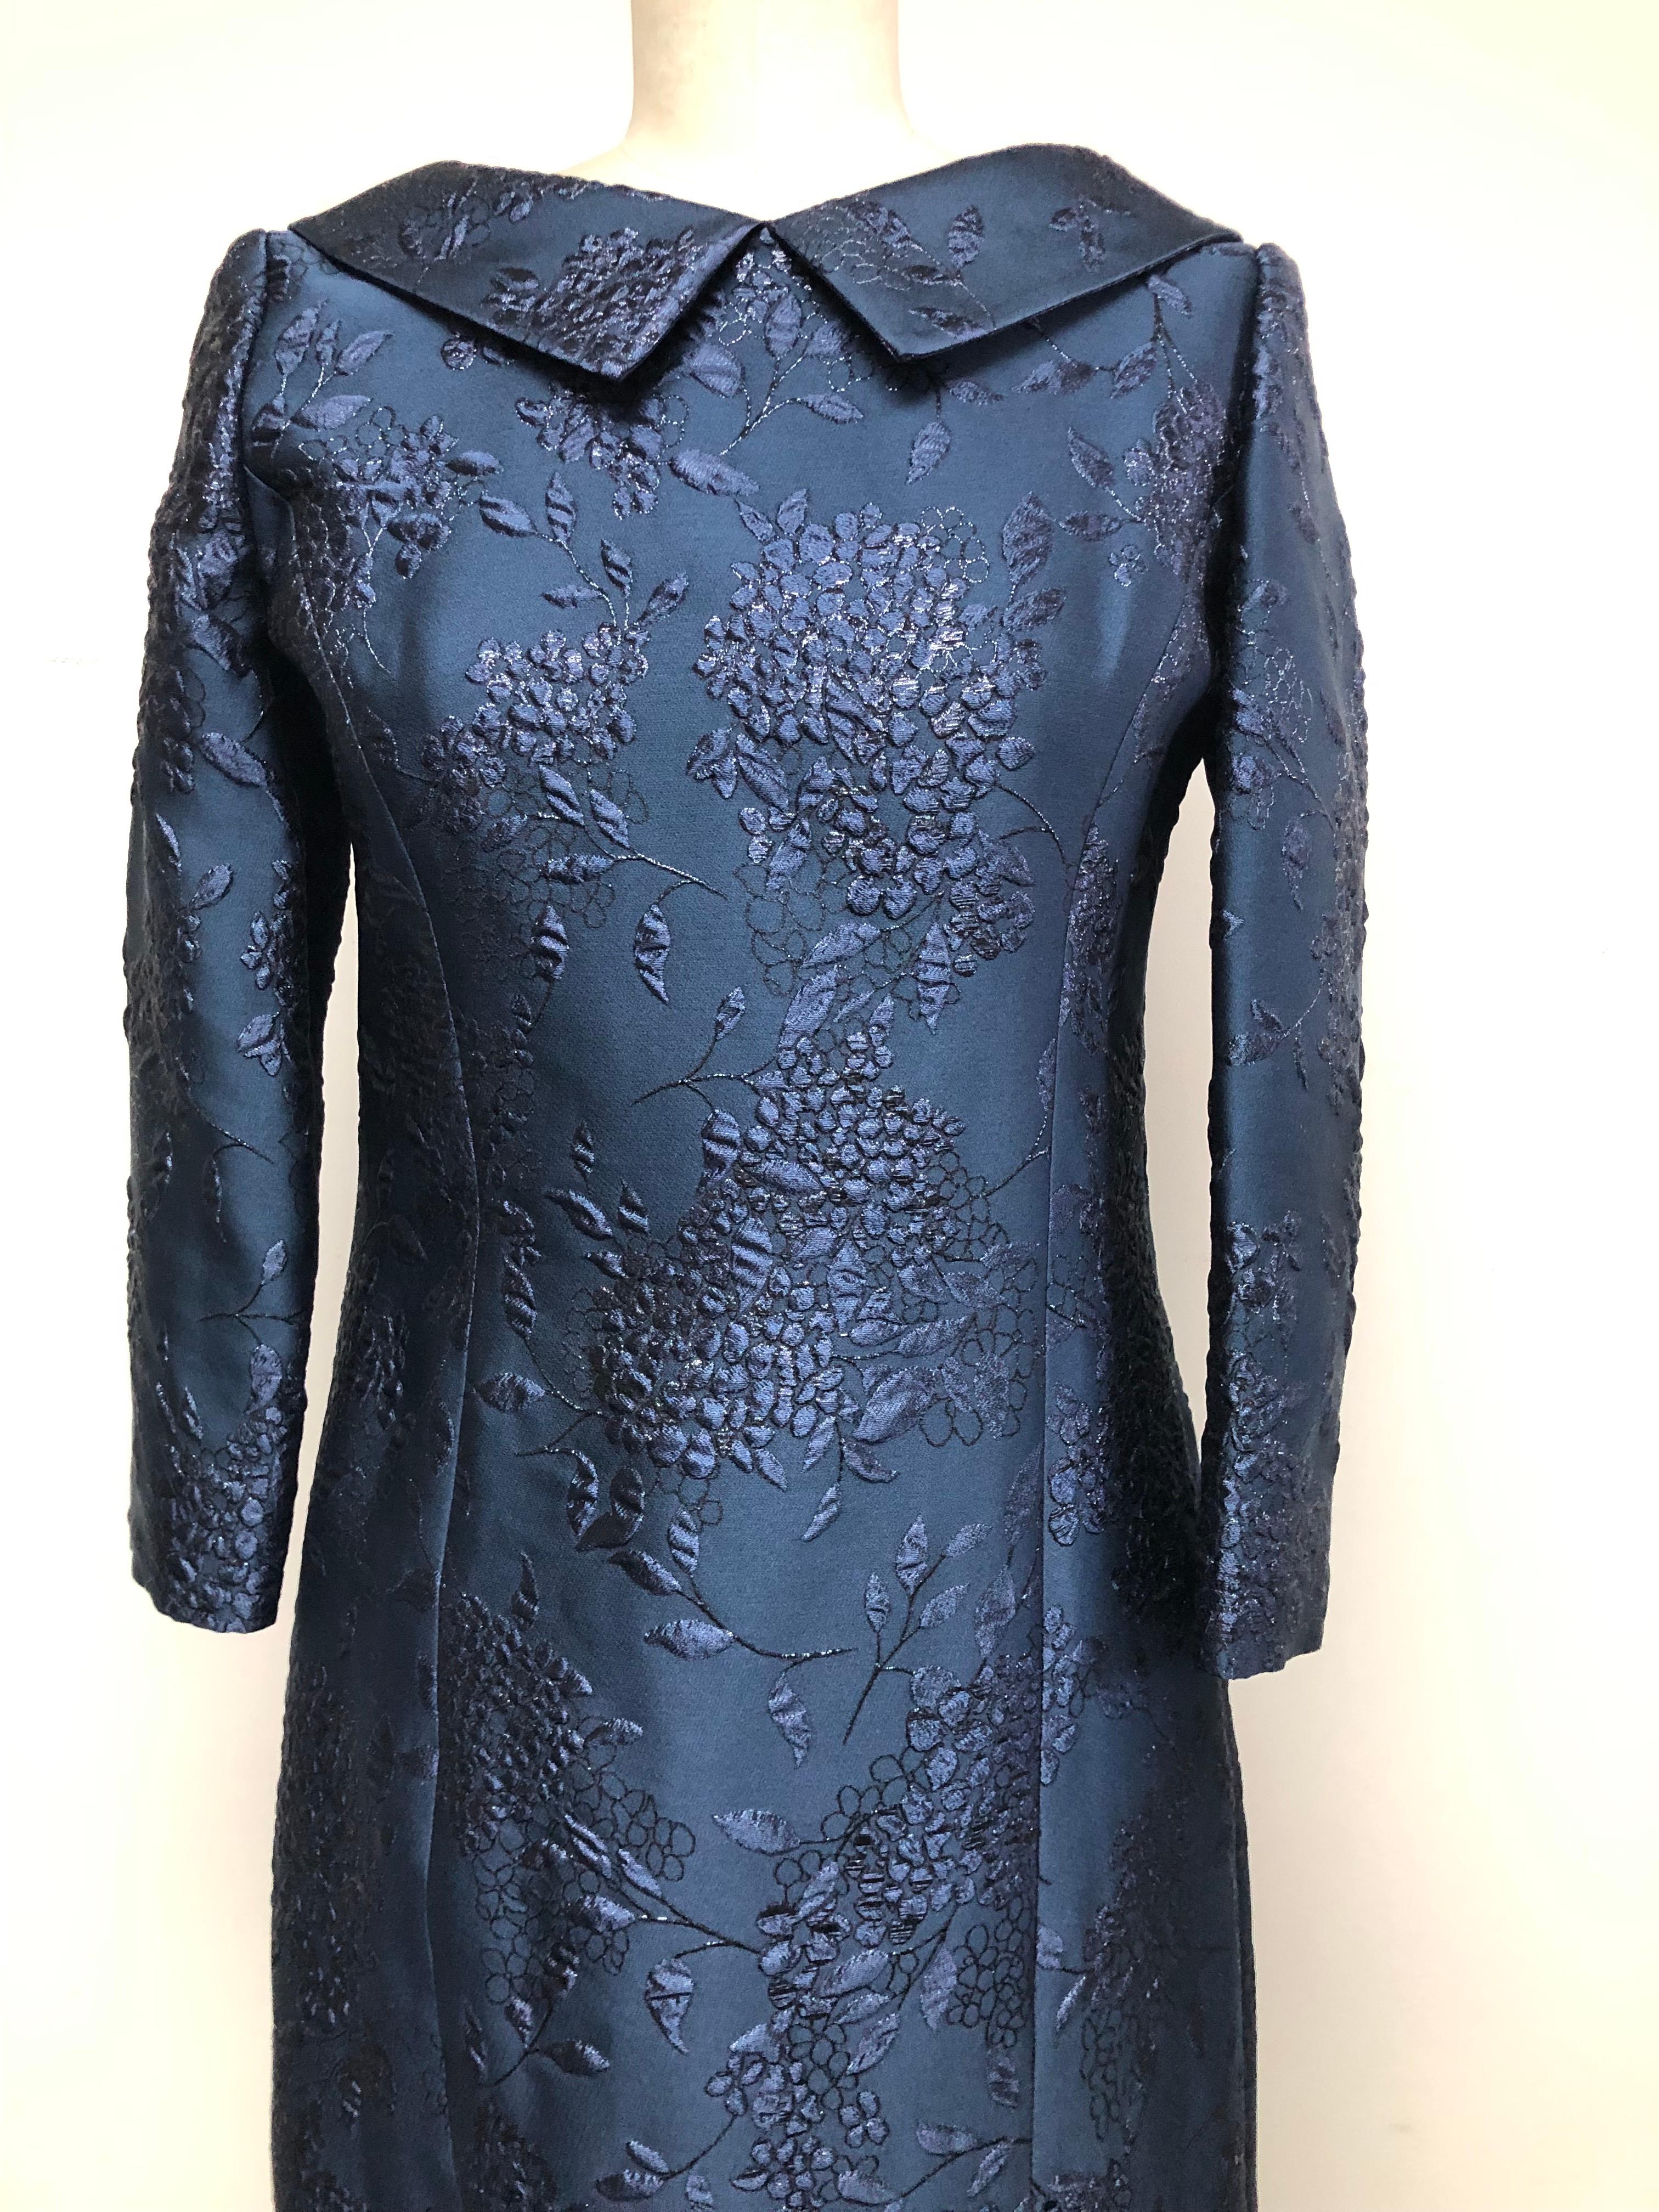 Navy lilac floral French brocade loose fitting slim dress with 3 /4 sleeves. The collar drapes uniquely to the back into elegant gathers. Comfortable and chic—easily transitions from day into evening. A Belle du Jour inspired design with a shimmer.